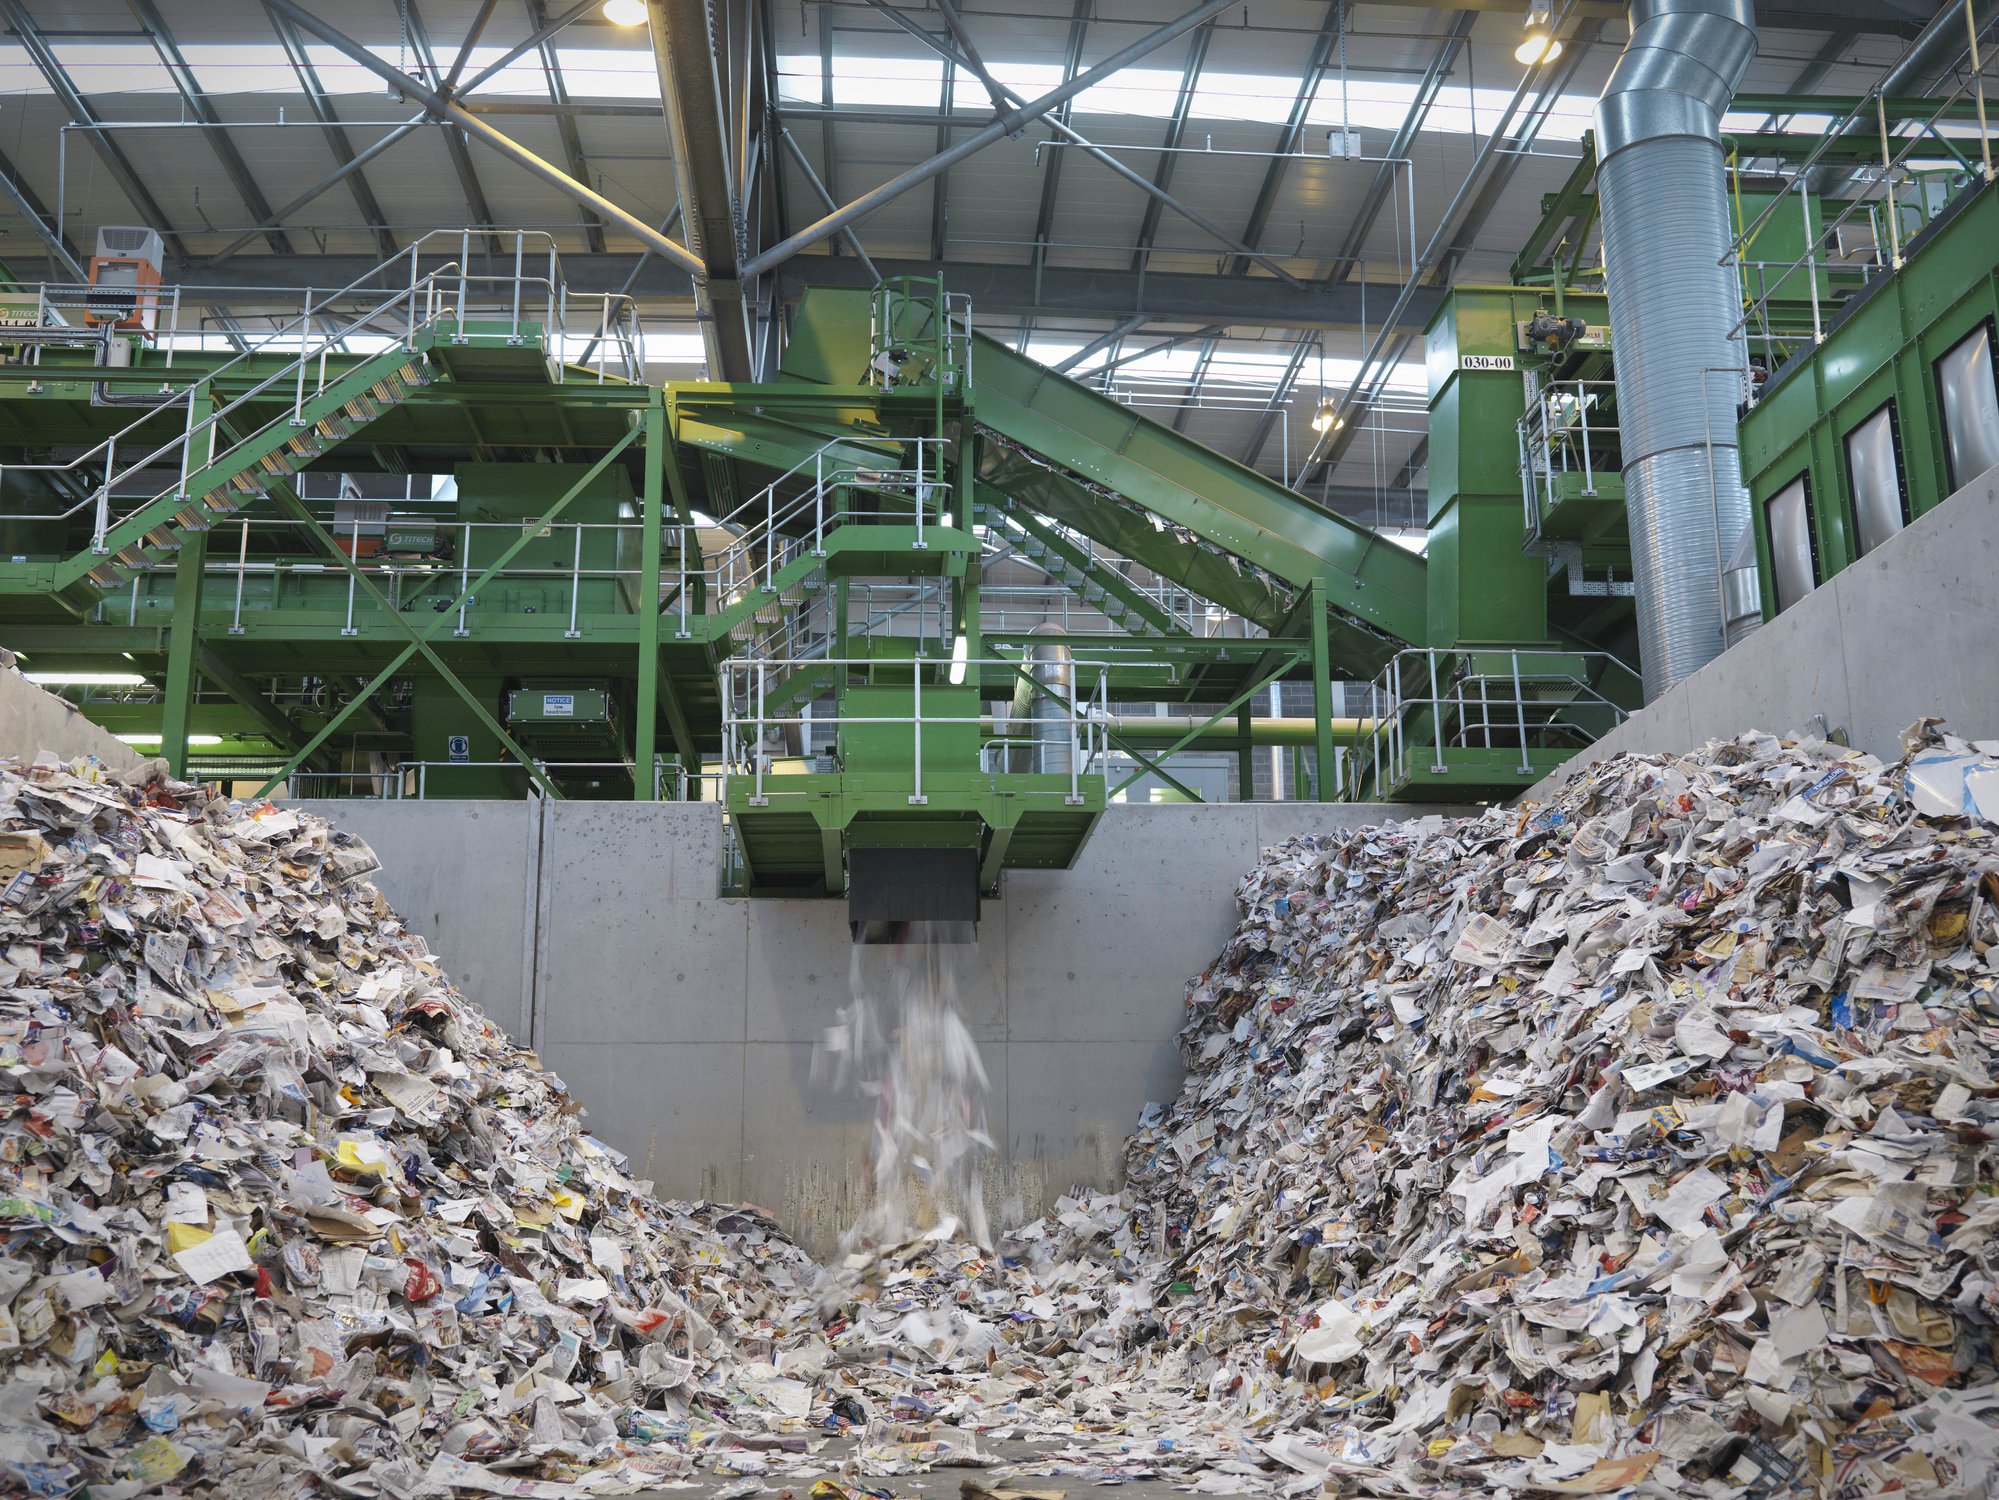 Papierrecyclingmaschine I Quelle: Getty Images